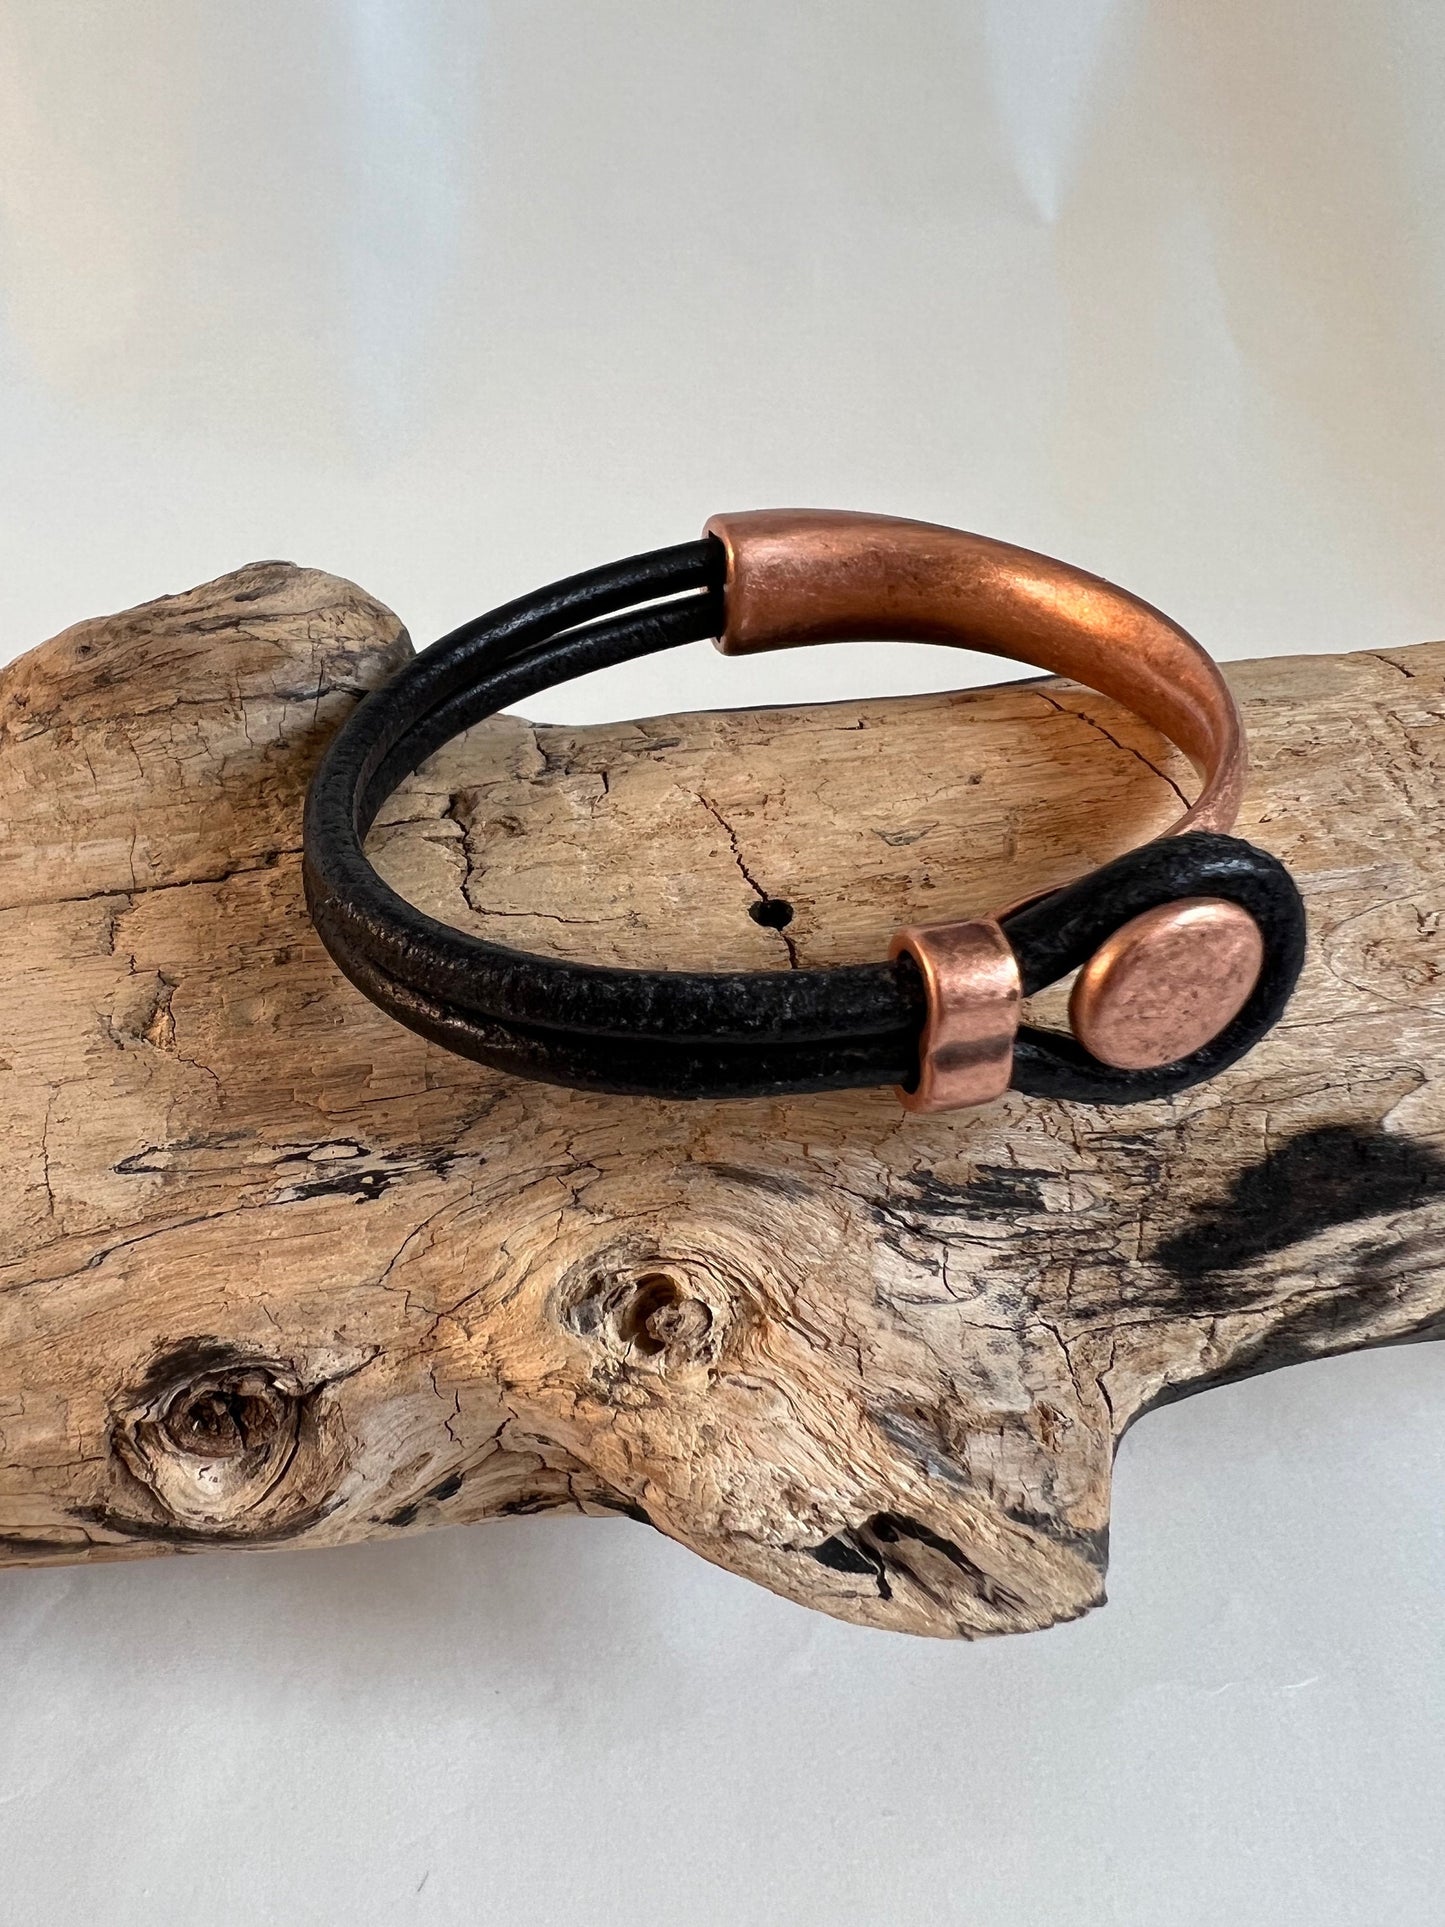 Italian black leather bracelet  with a copper button clasp. Half cuff style. Soft leather and trendy clasp.